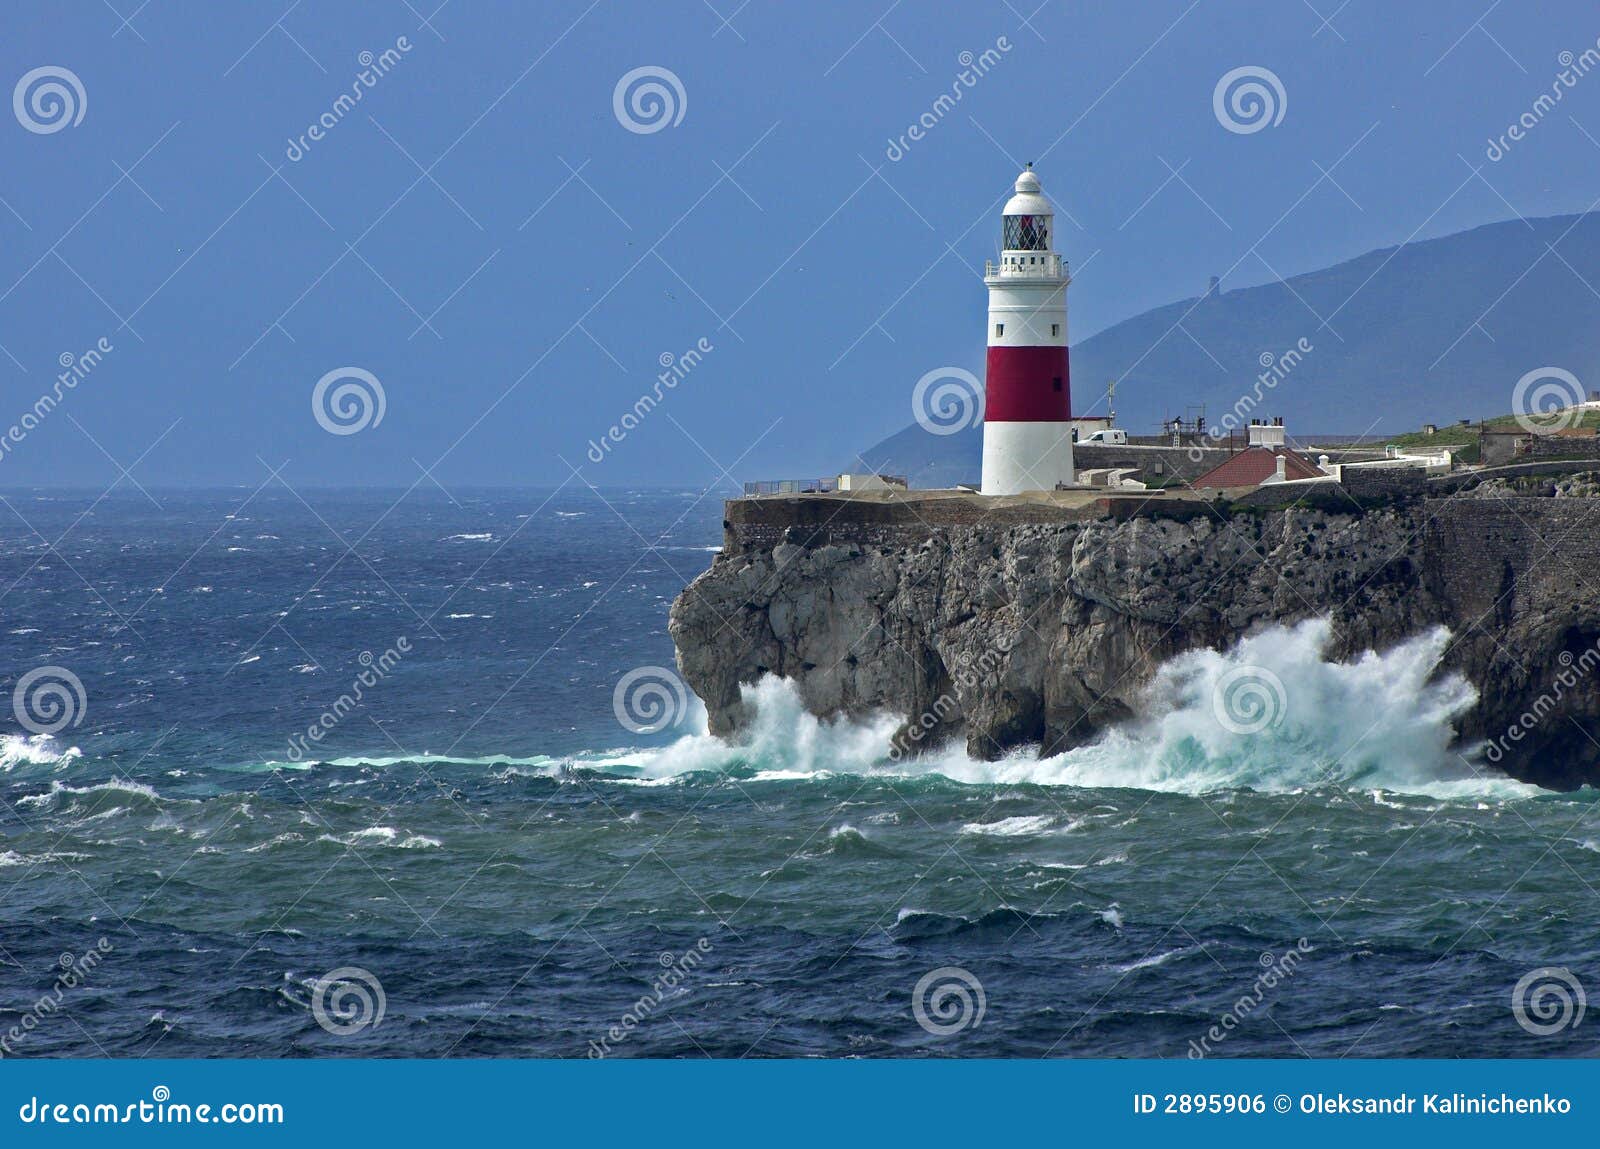 europa point lighthouse